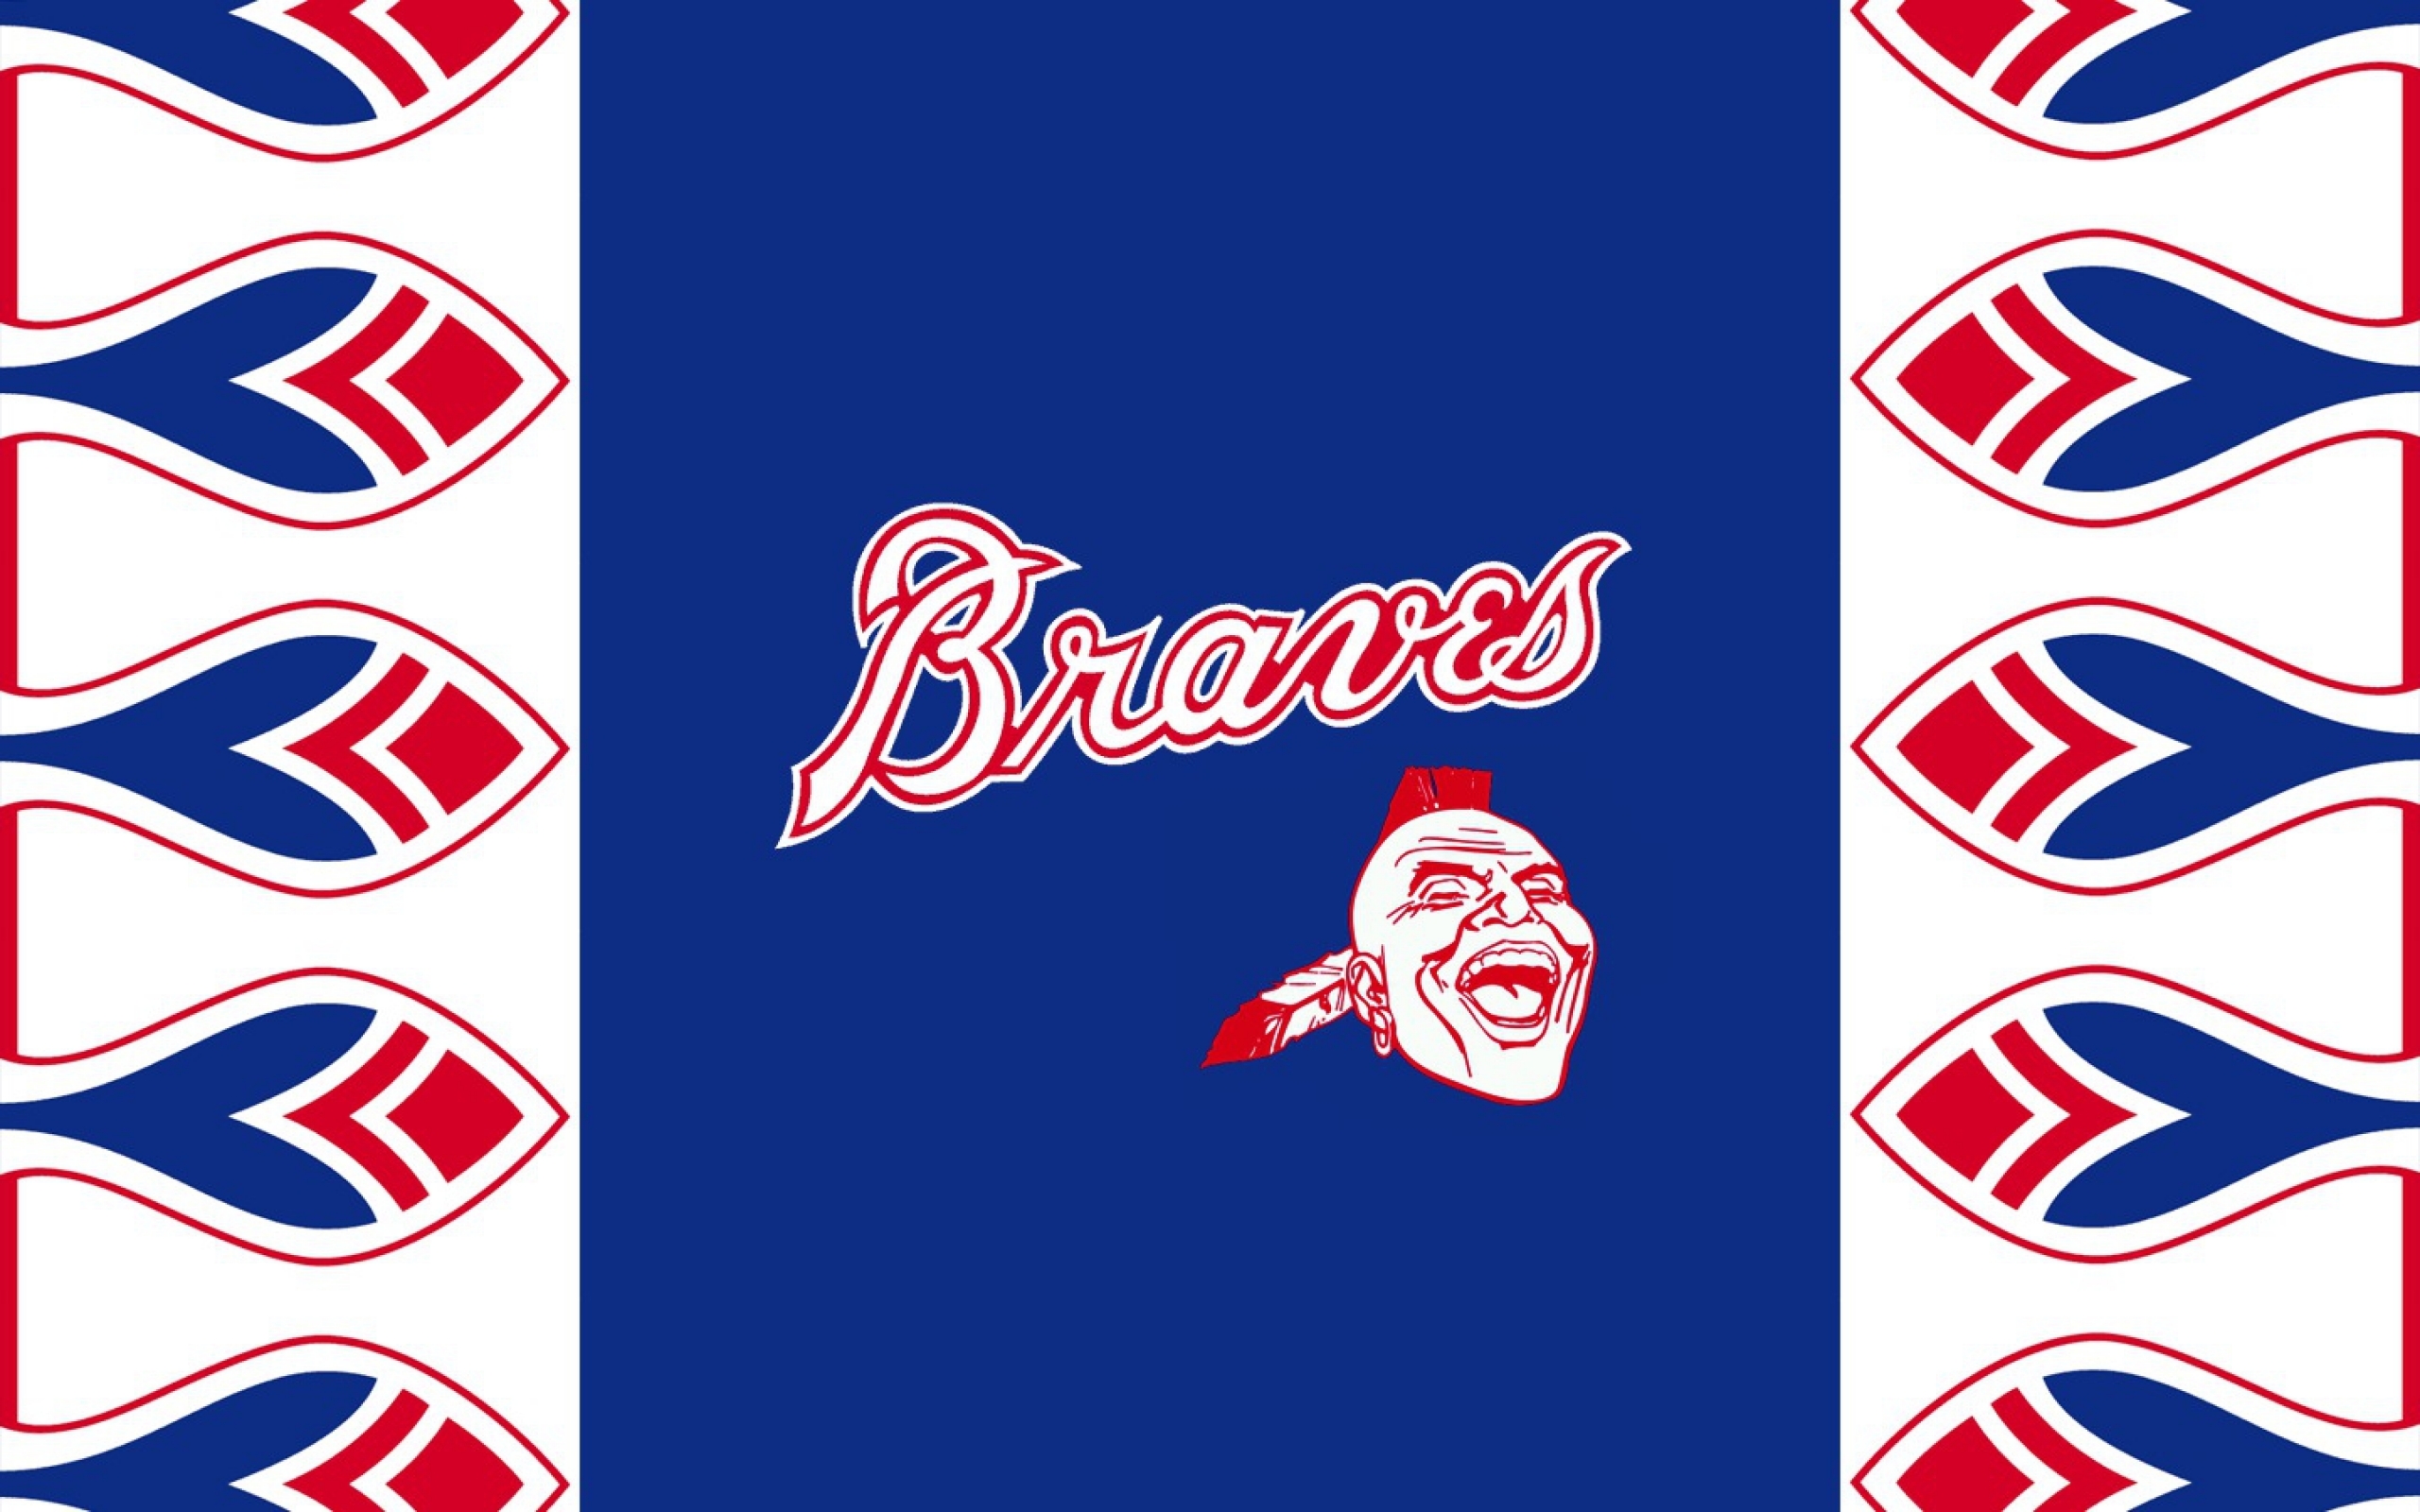 Atlanta Braves Wallpapers HD | HD Wallpapers, Backgrounds, Images ...